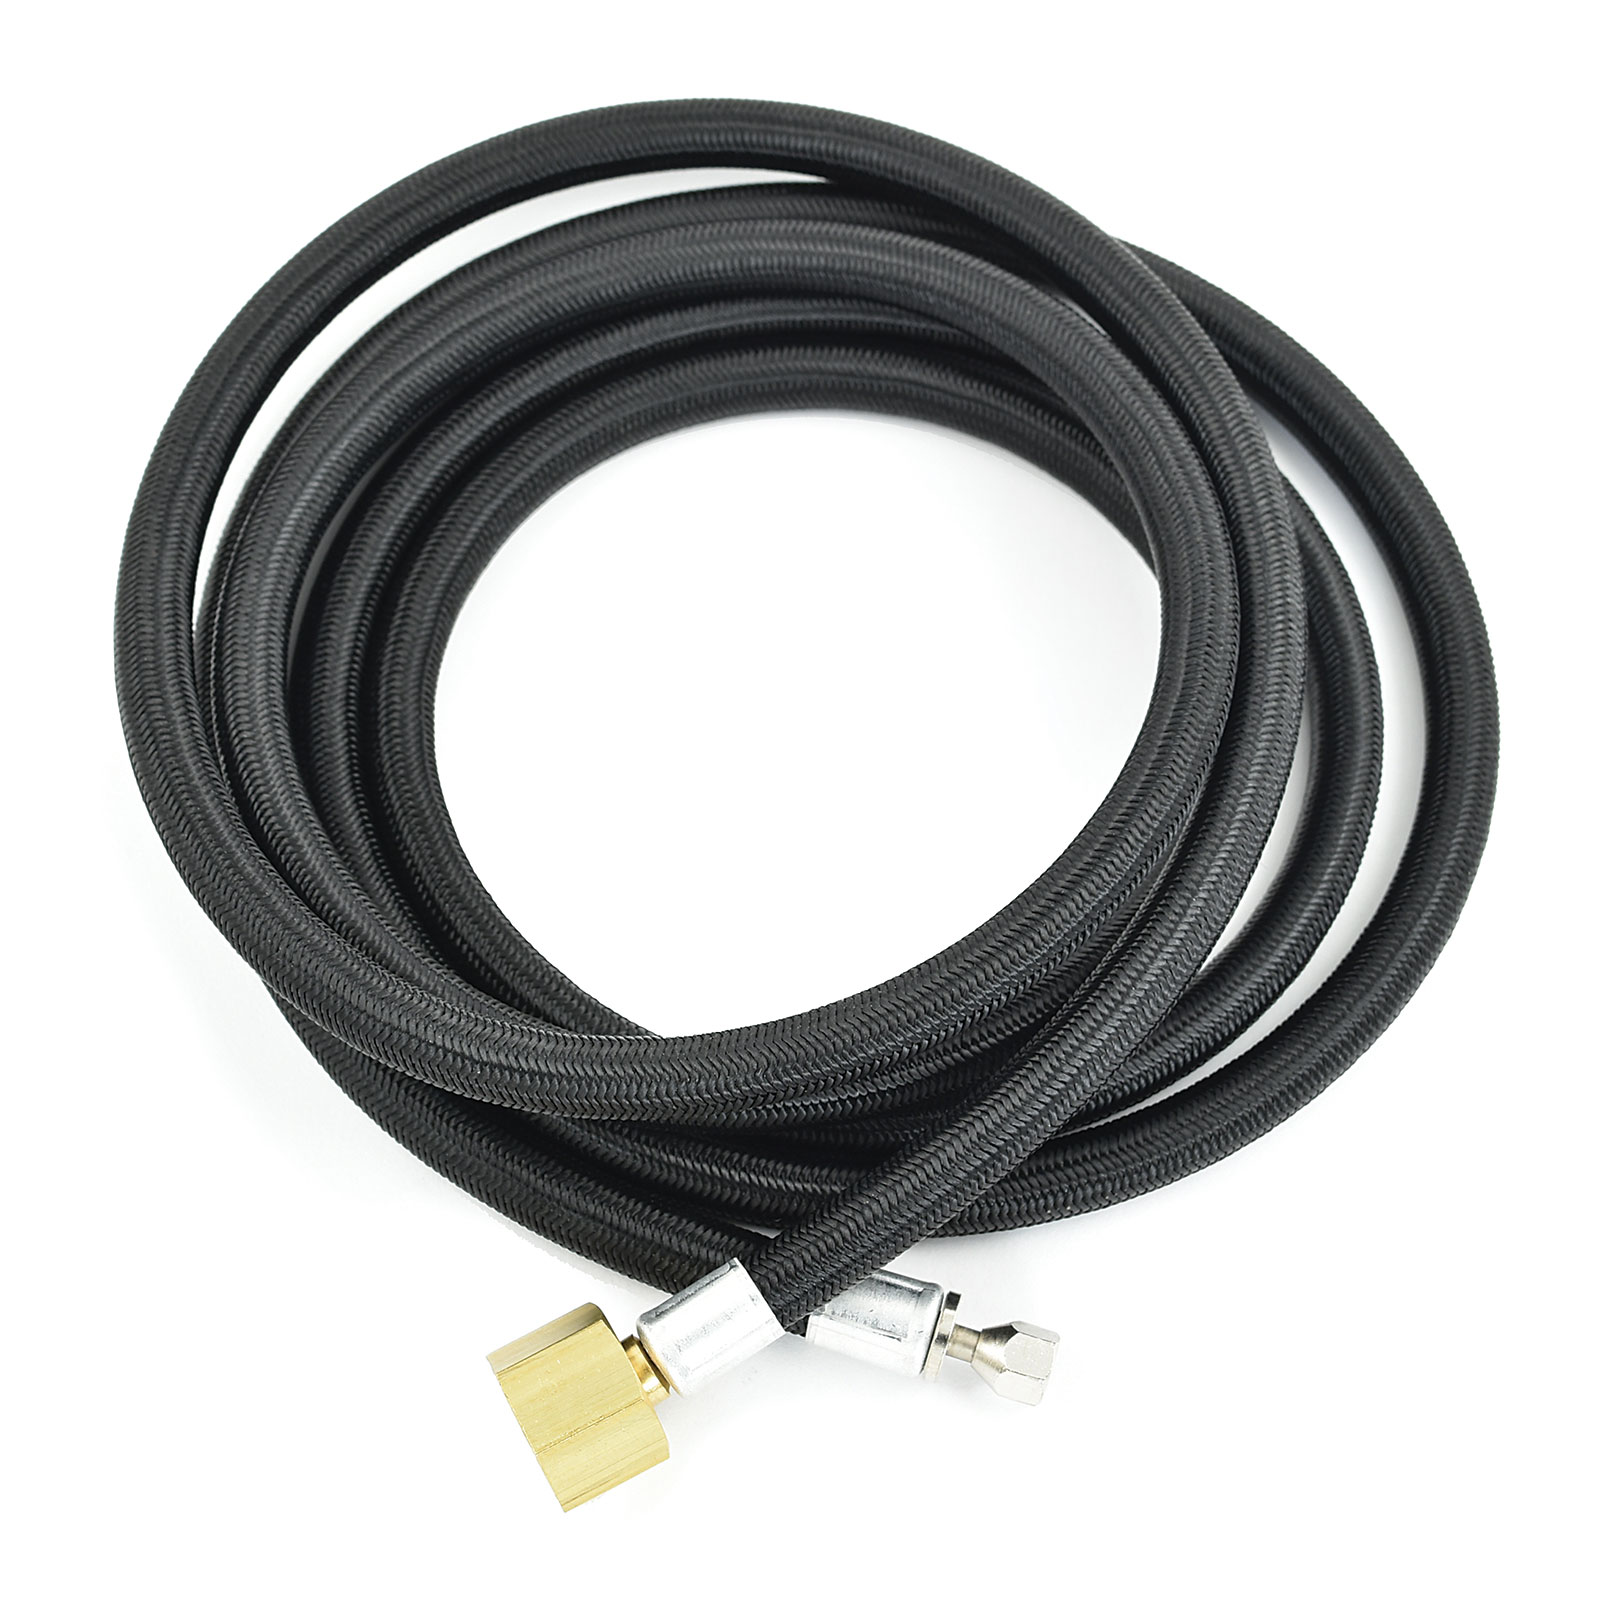 Badger 6' Rubber-Core Airbrush Hose